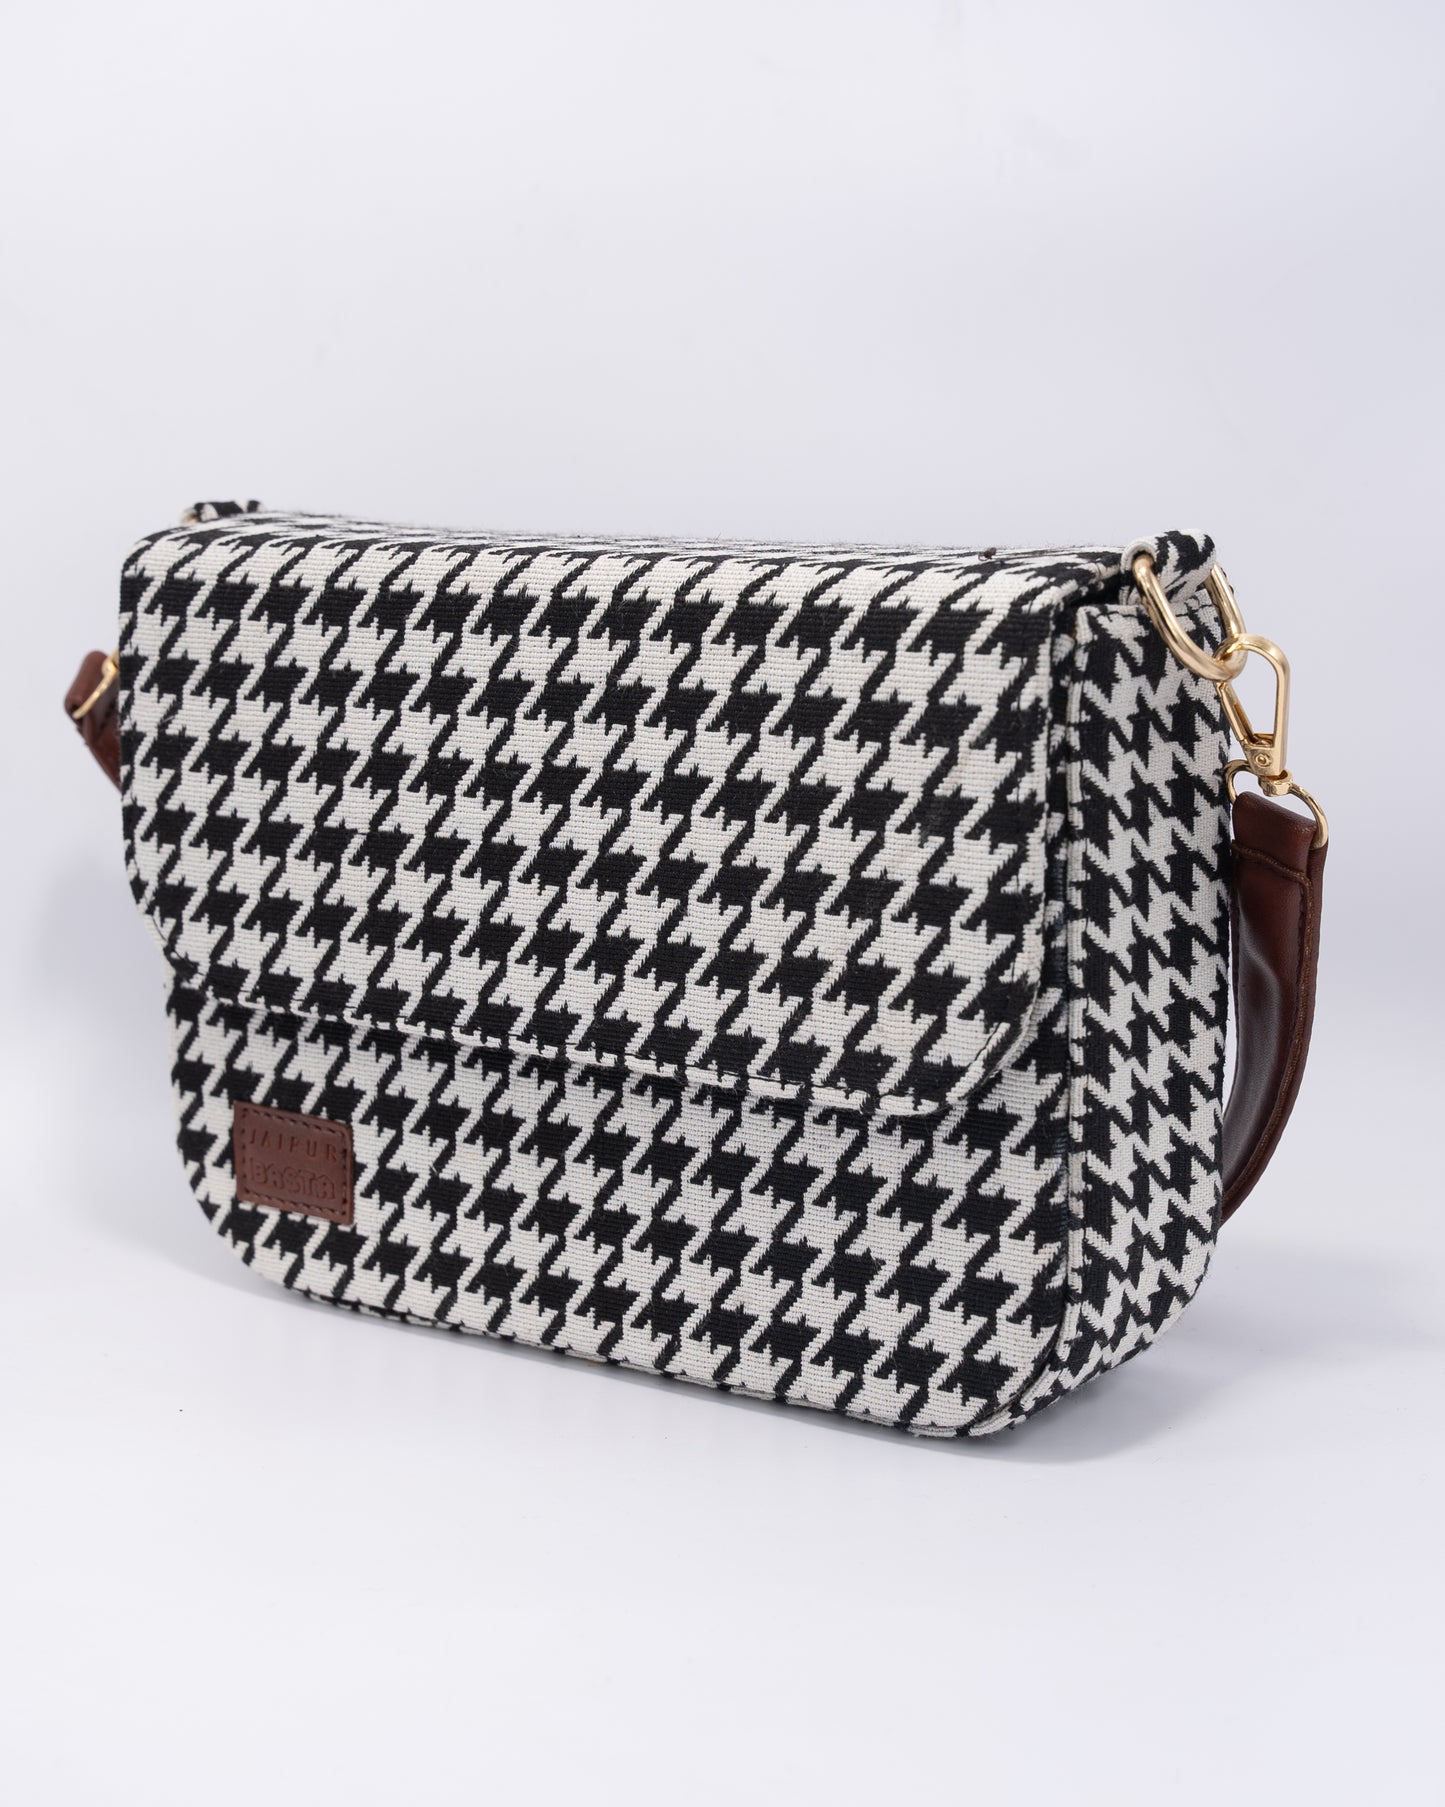 Monochrome Houndstooth Cross Body Bags